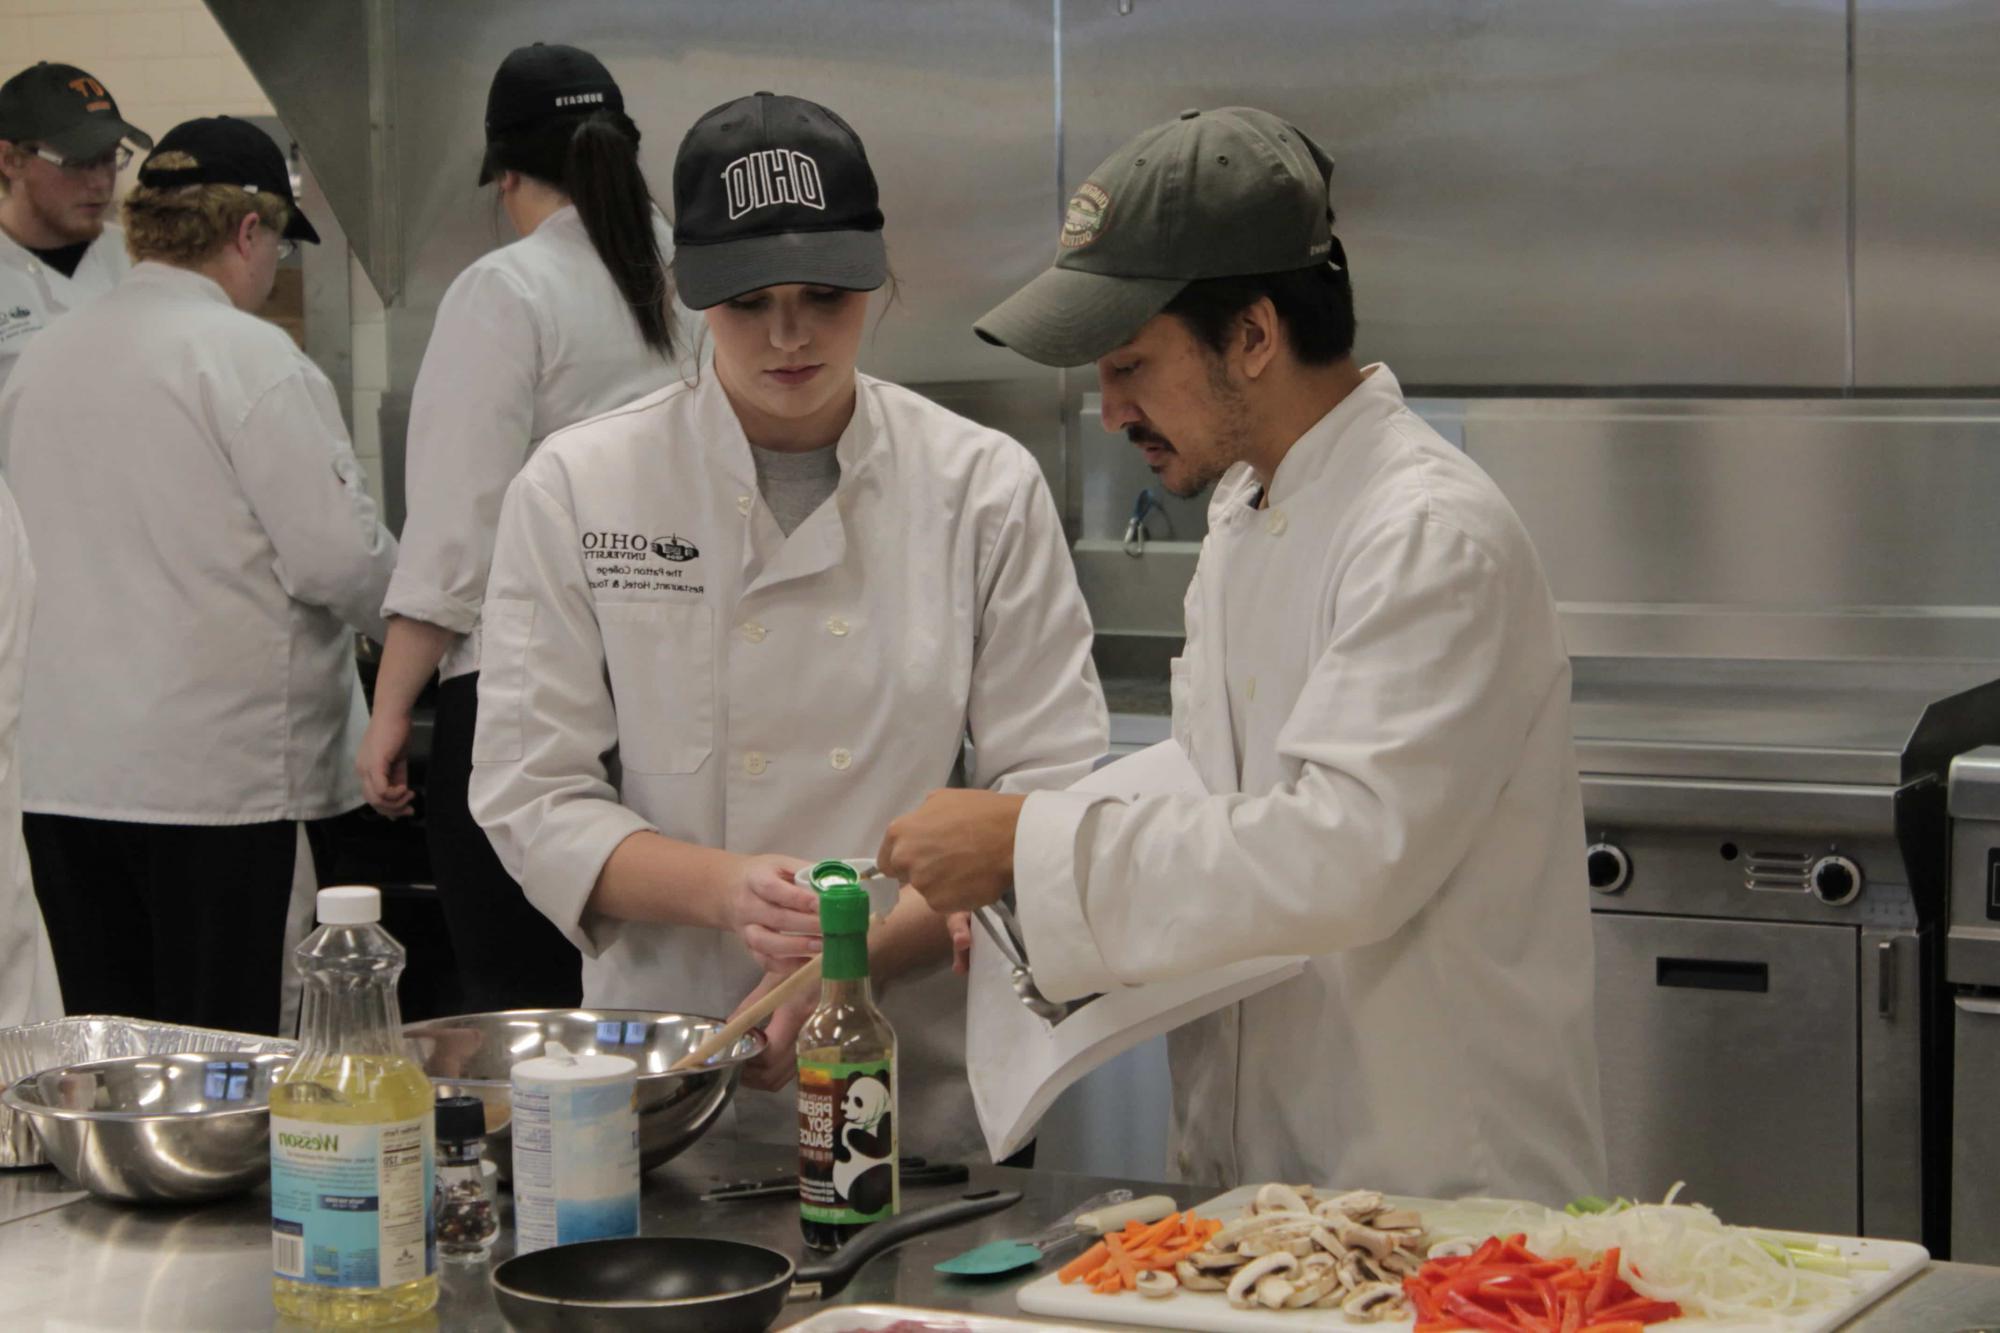 Culinary students work together while cooking.